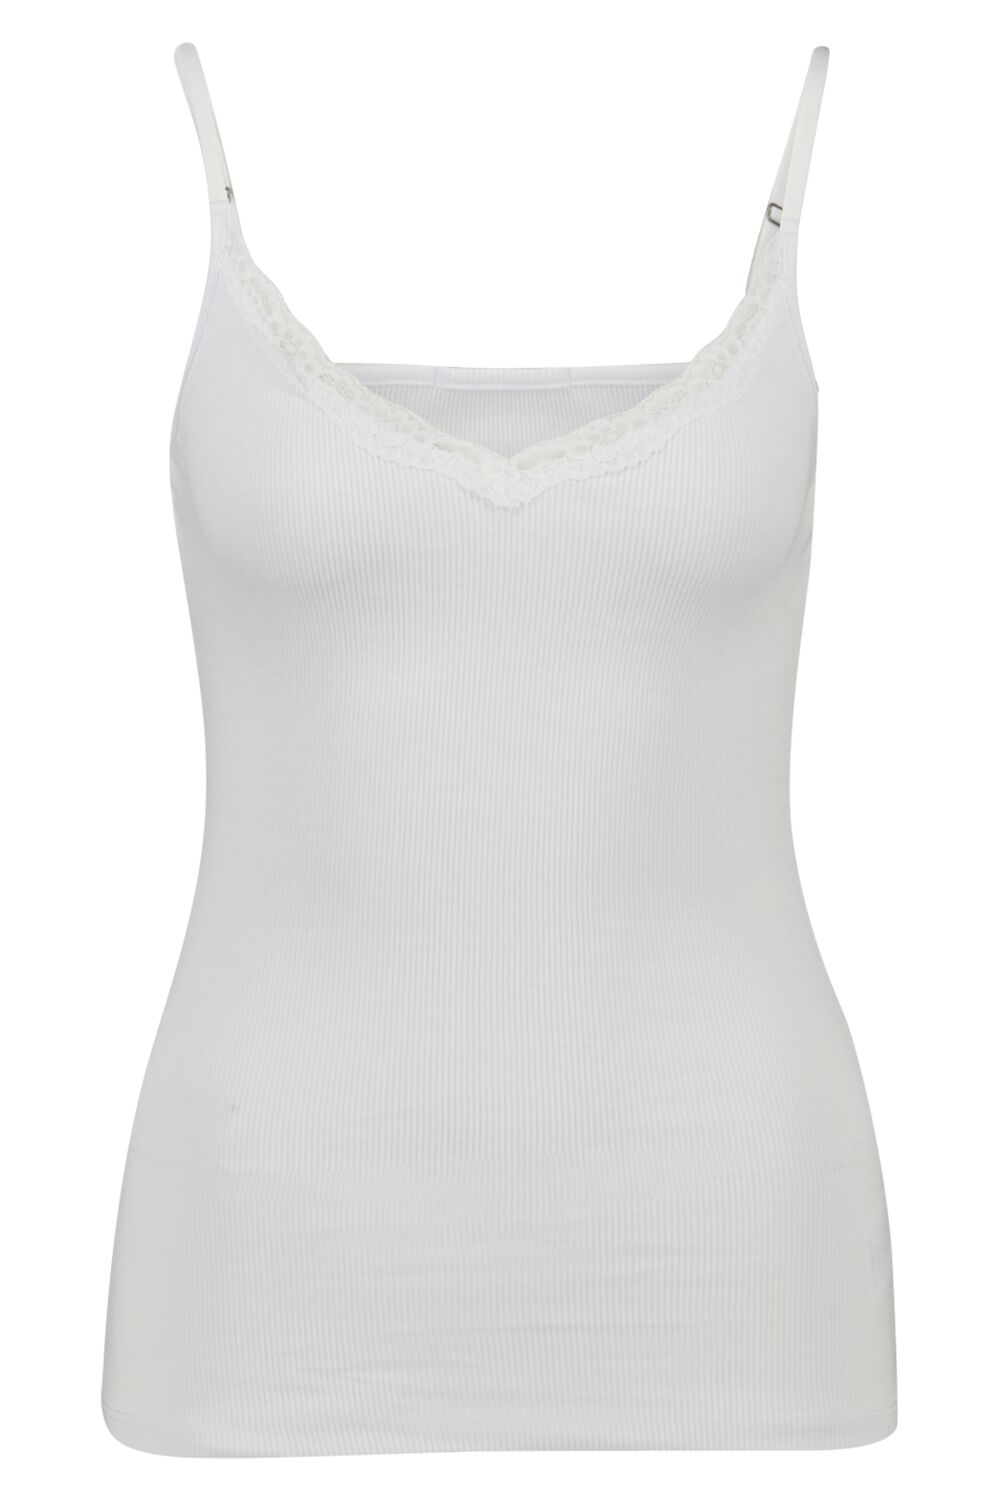 America Today Dames Singlet Grace Wit product